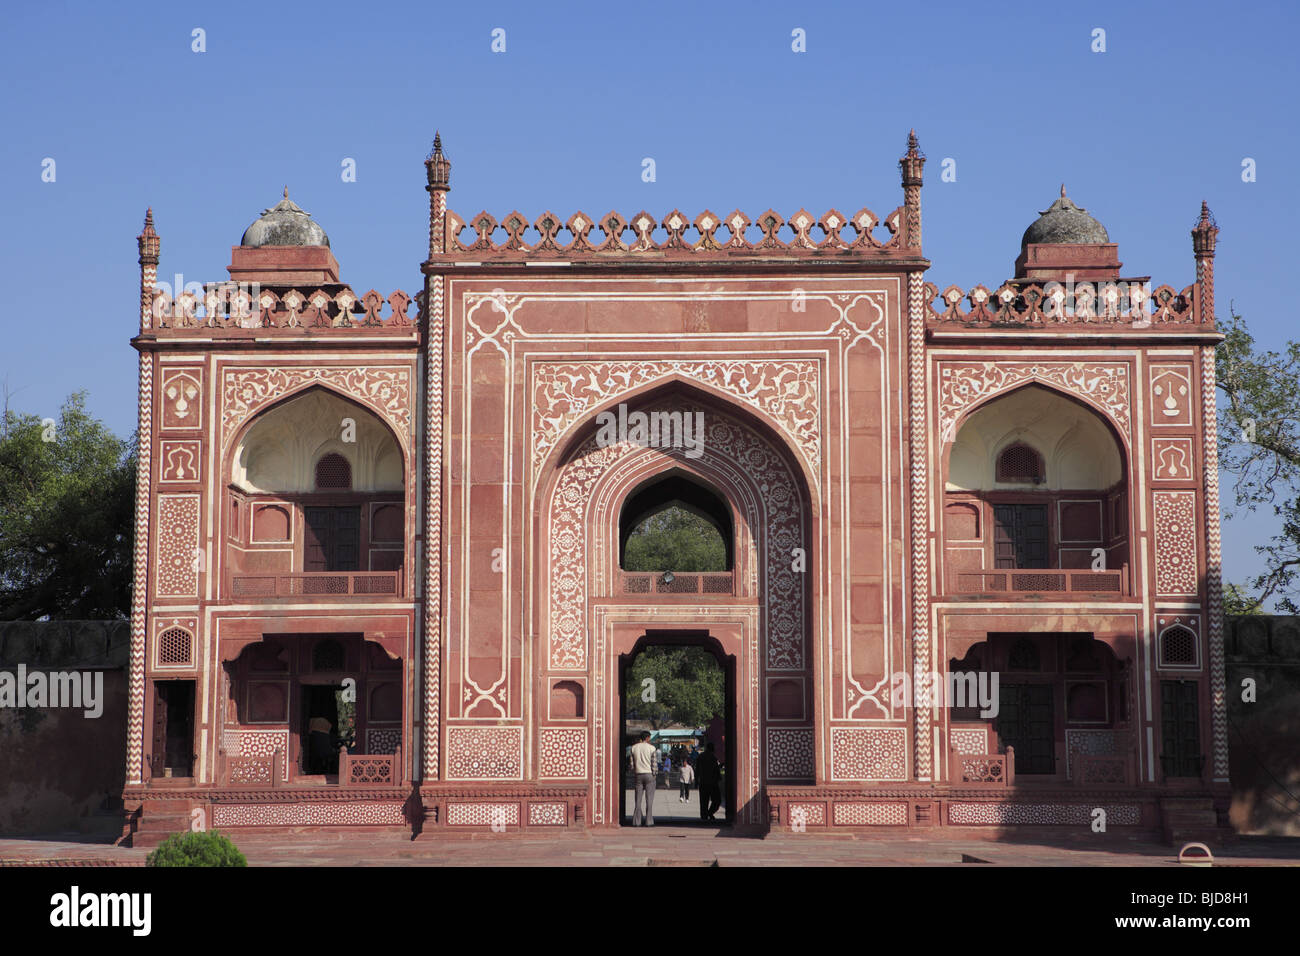 East gate main entrance of Itimad-ud-Daula tomb mausoleum of white marble built by Mughal emperor ; Agra ; Uttar Pradesh ; India Stock Photo